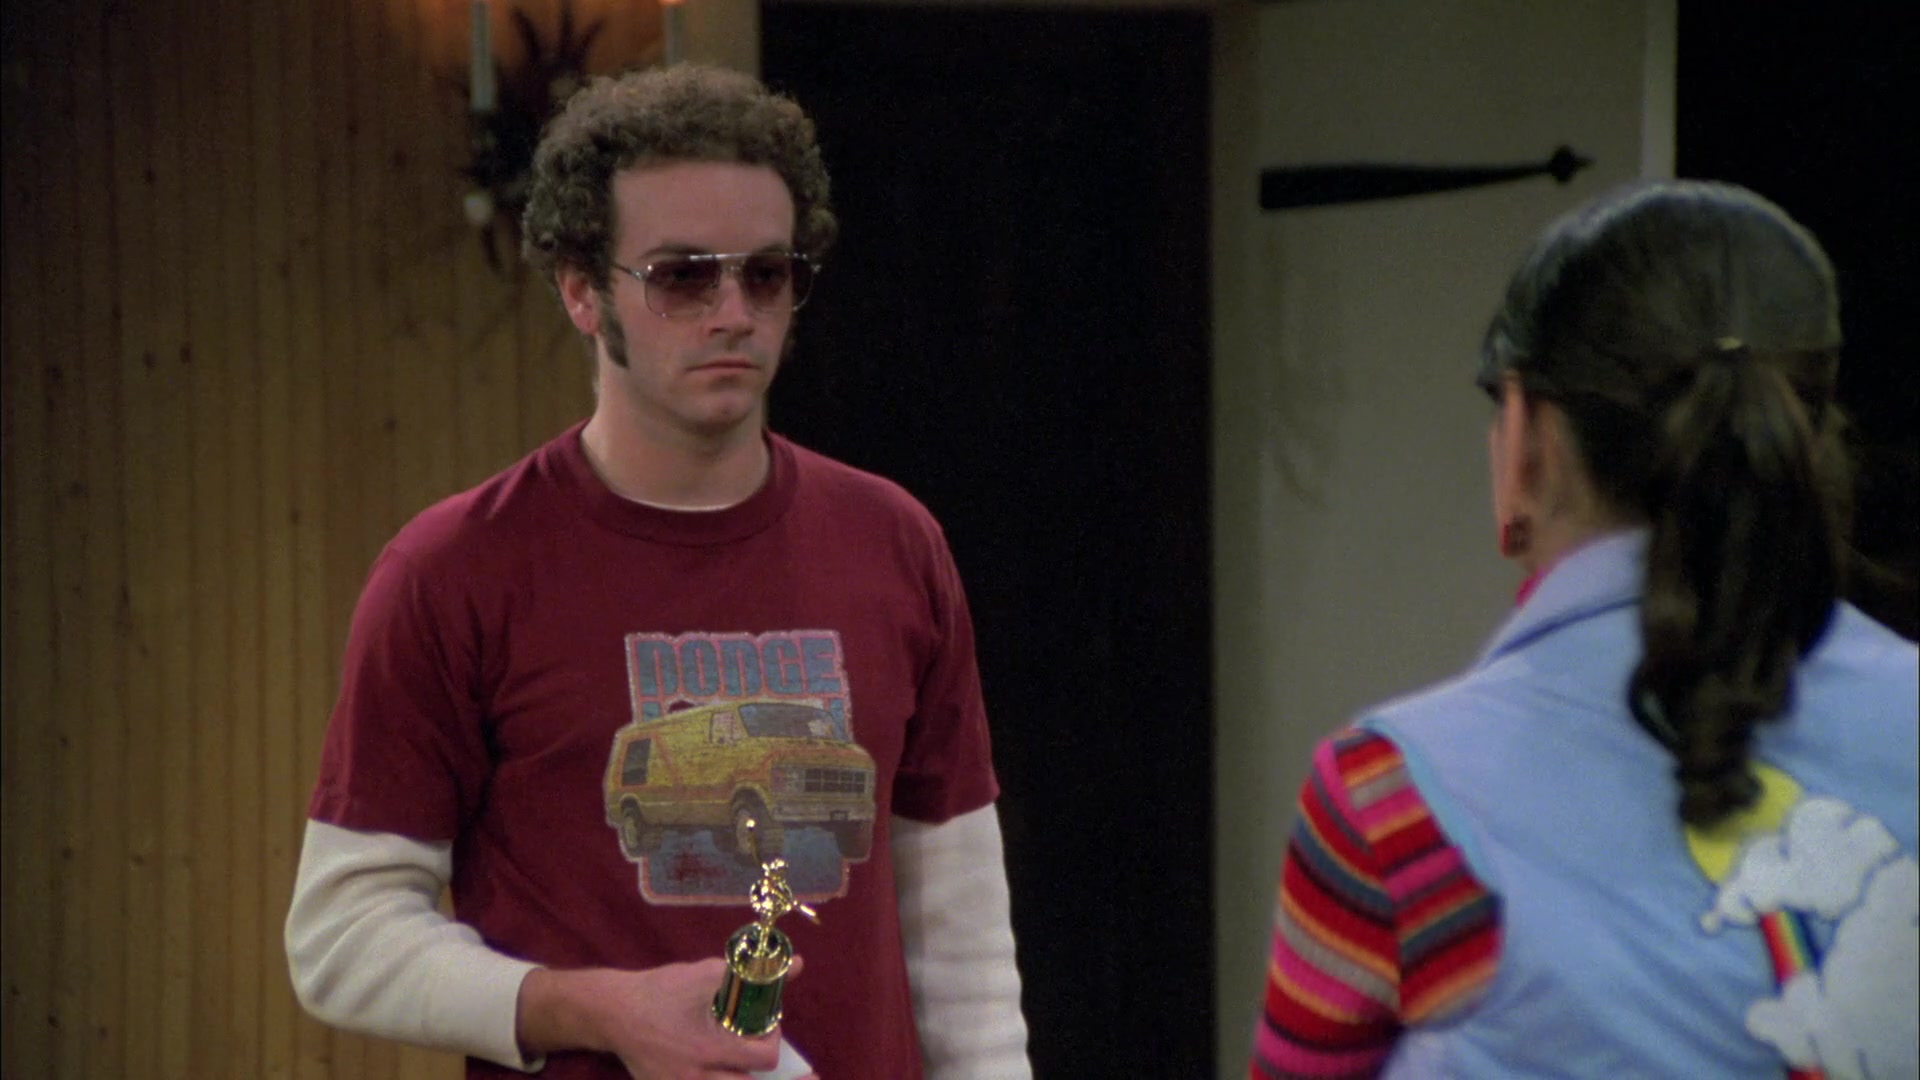 Dodge T-Shirt Of Danny Masterson As Steven Hyde In That '70s Show S05E12  "Misty Mountain Hop" (2003)